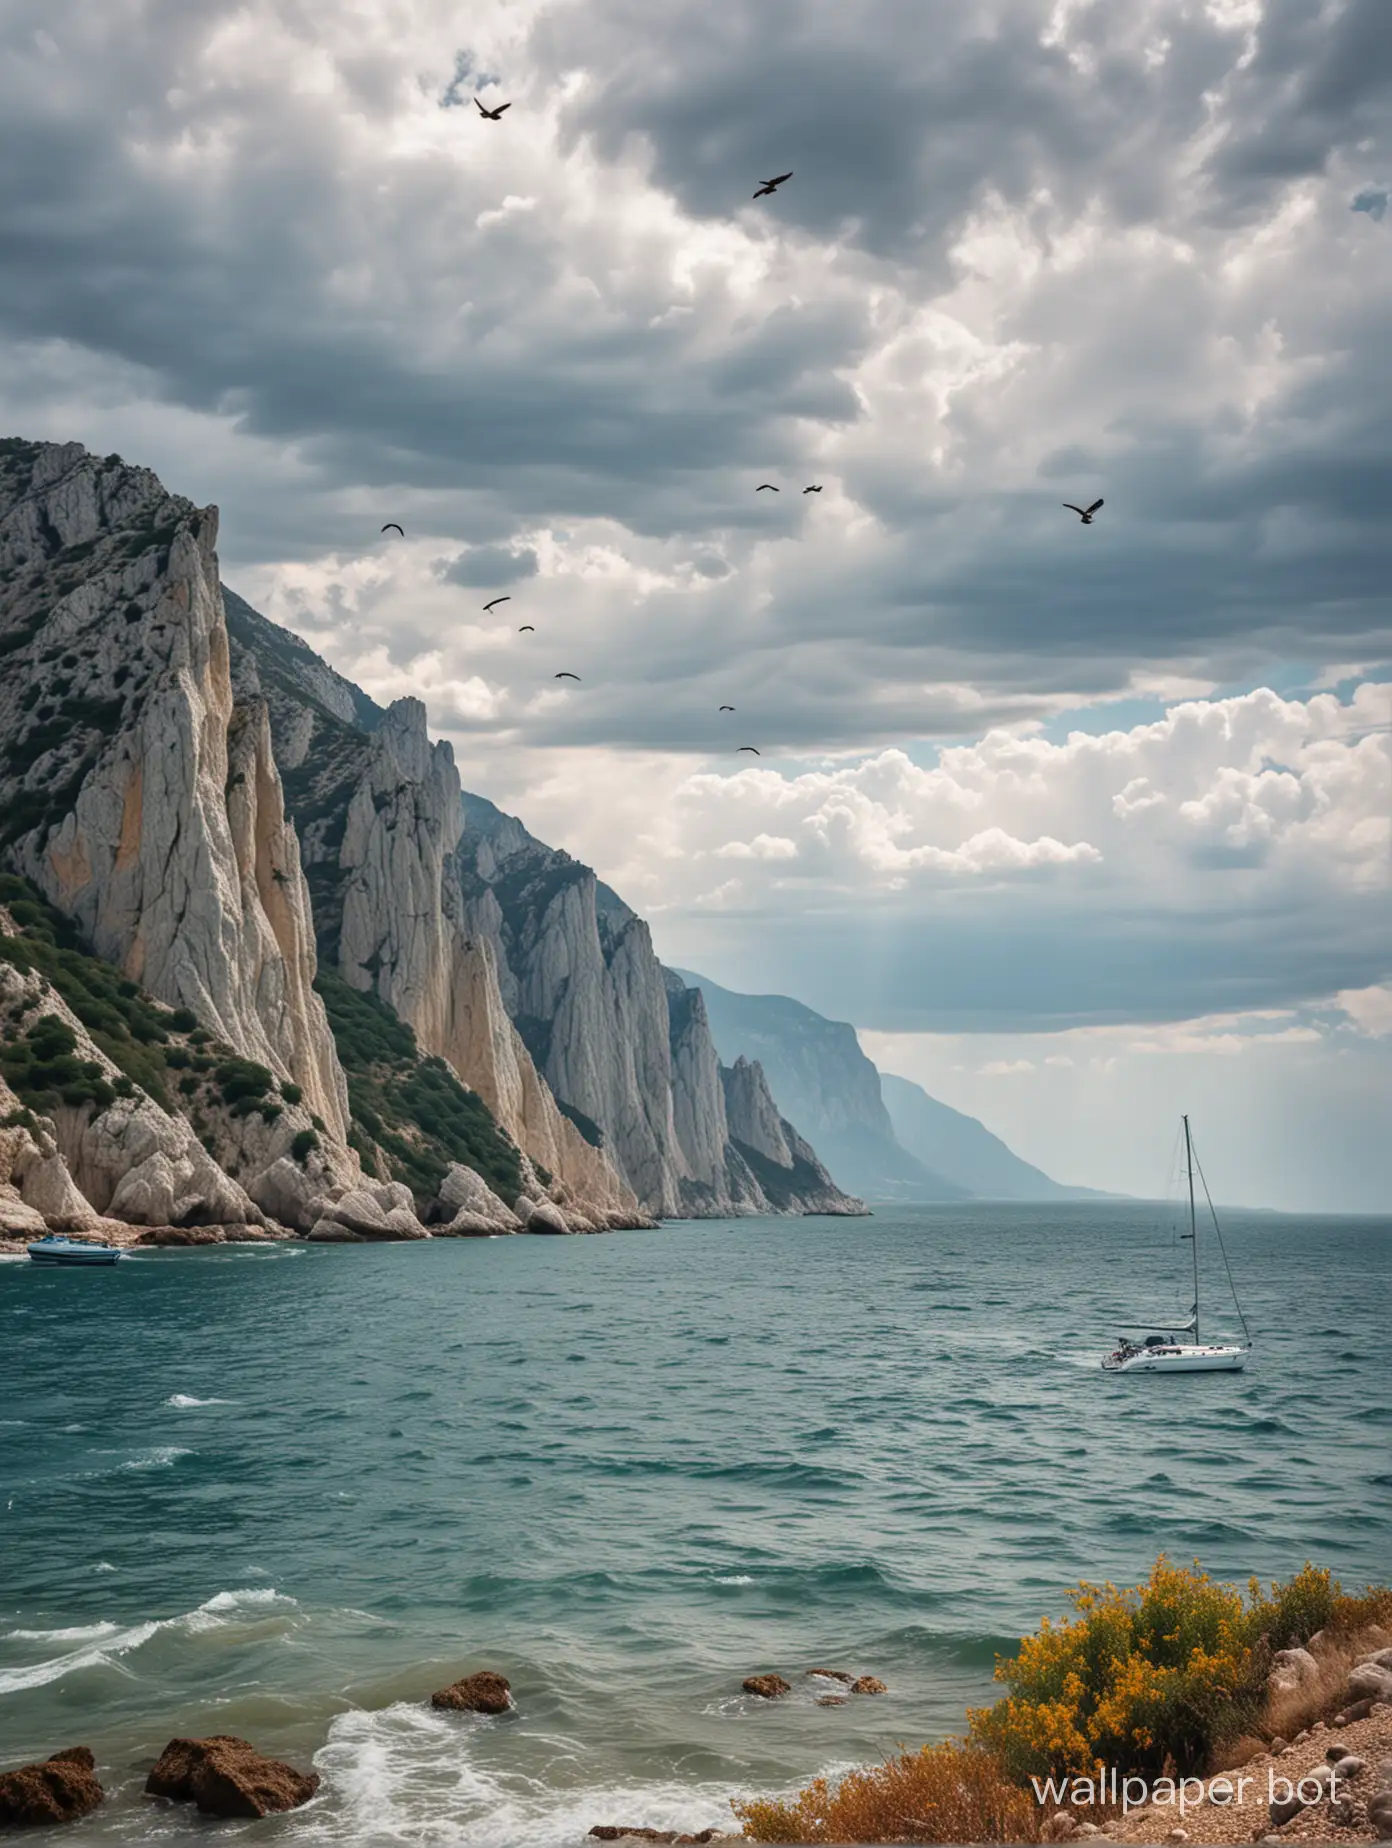 shore of the sea in Crimea, mountains, birds, yacht, clouds